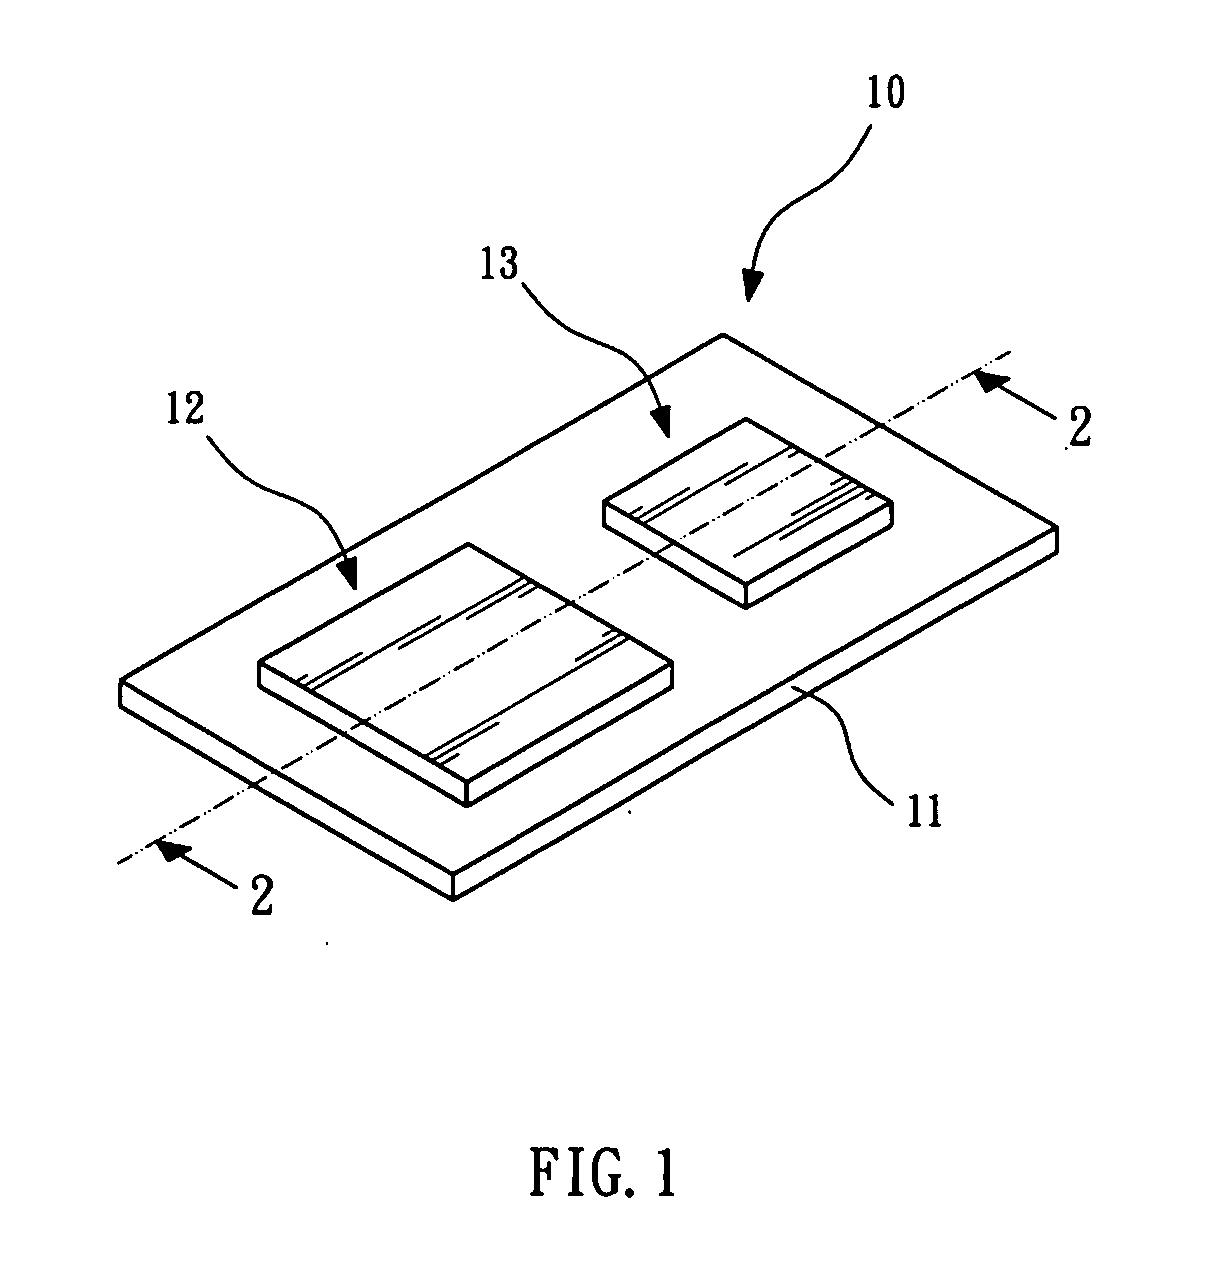 Multi-chip package structure